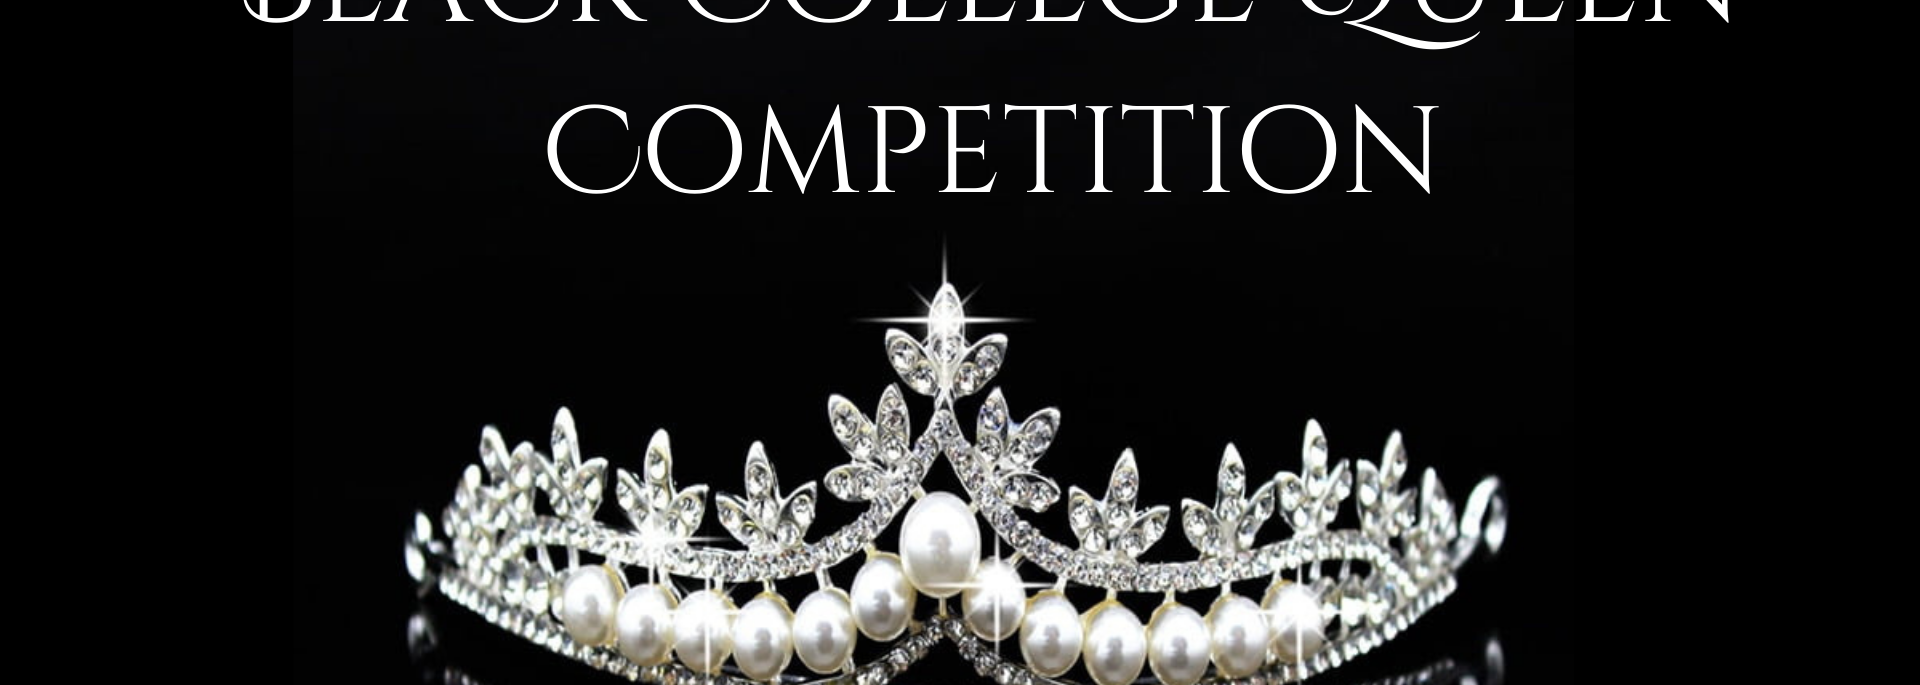 Black College Queens Competition